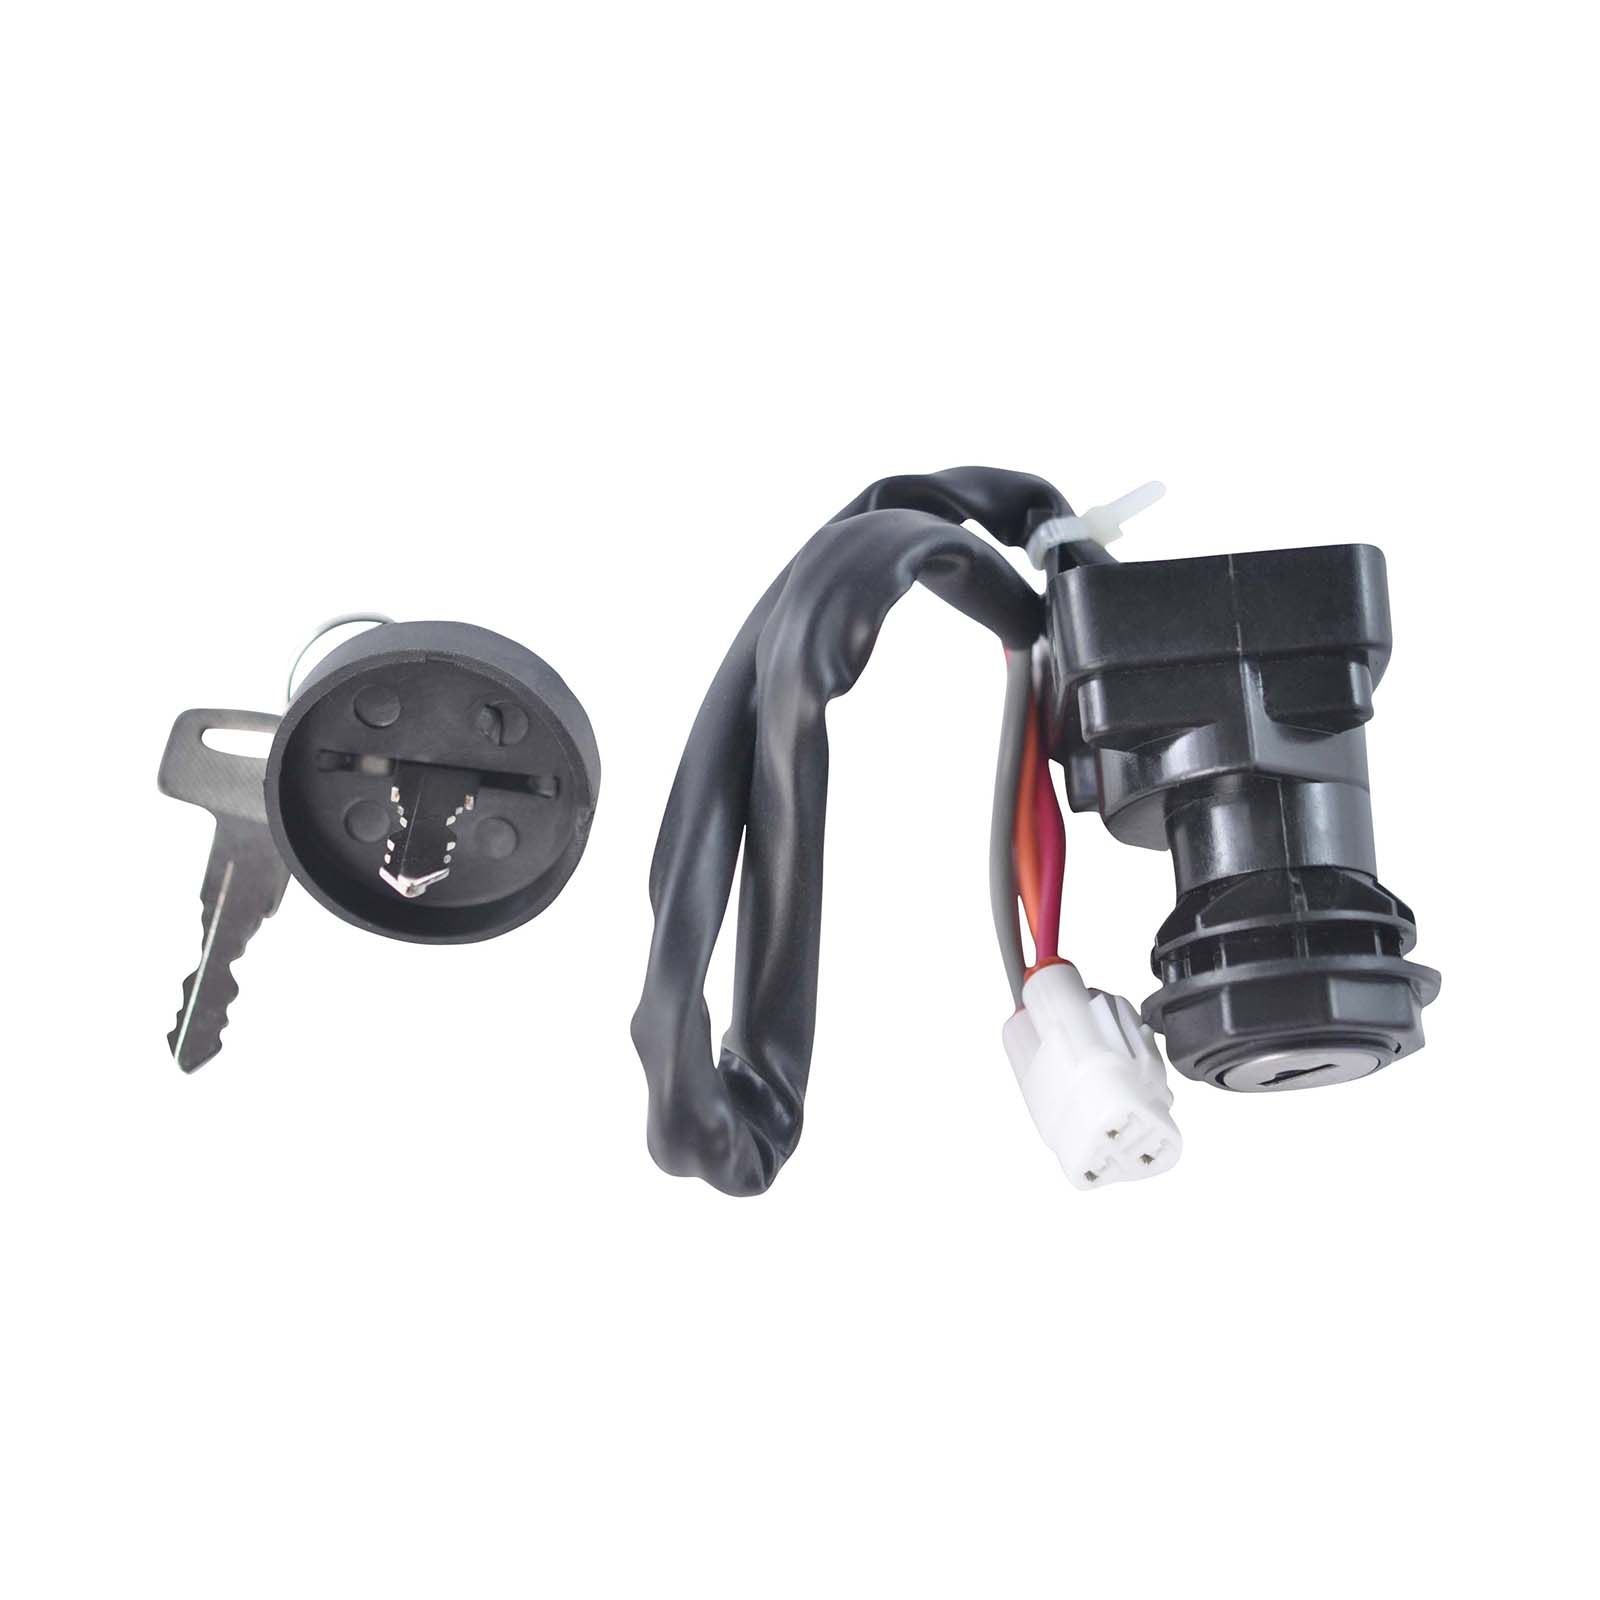 RMSTATOR 3-Position Ignition Key Switch - Assorted For Kawasaki Models #RMS05034